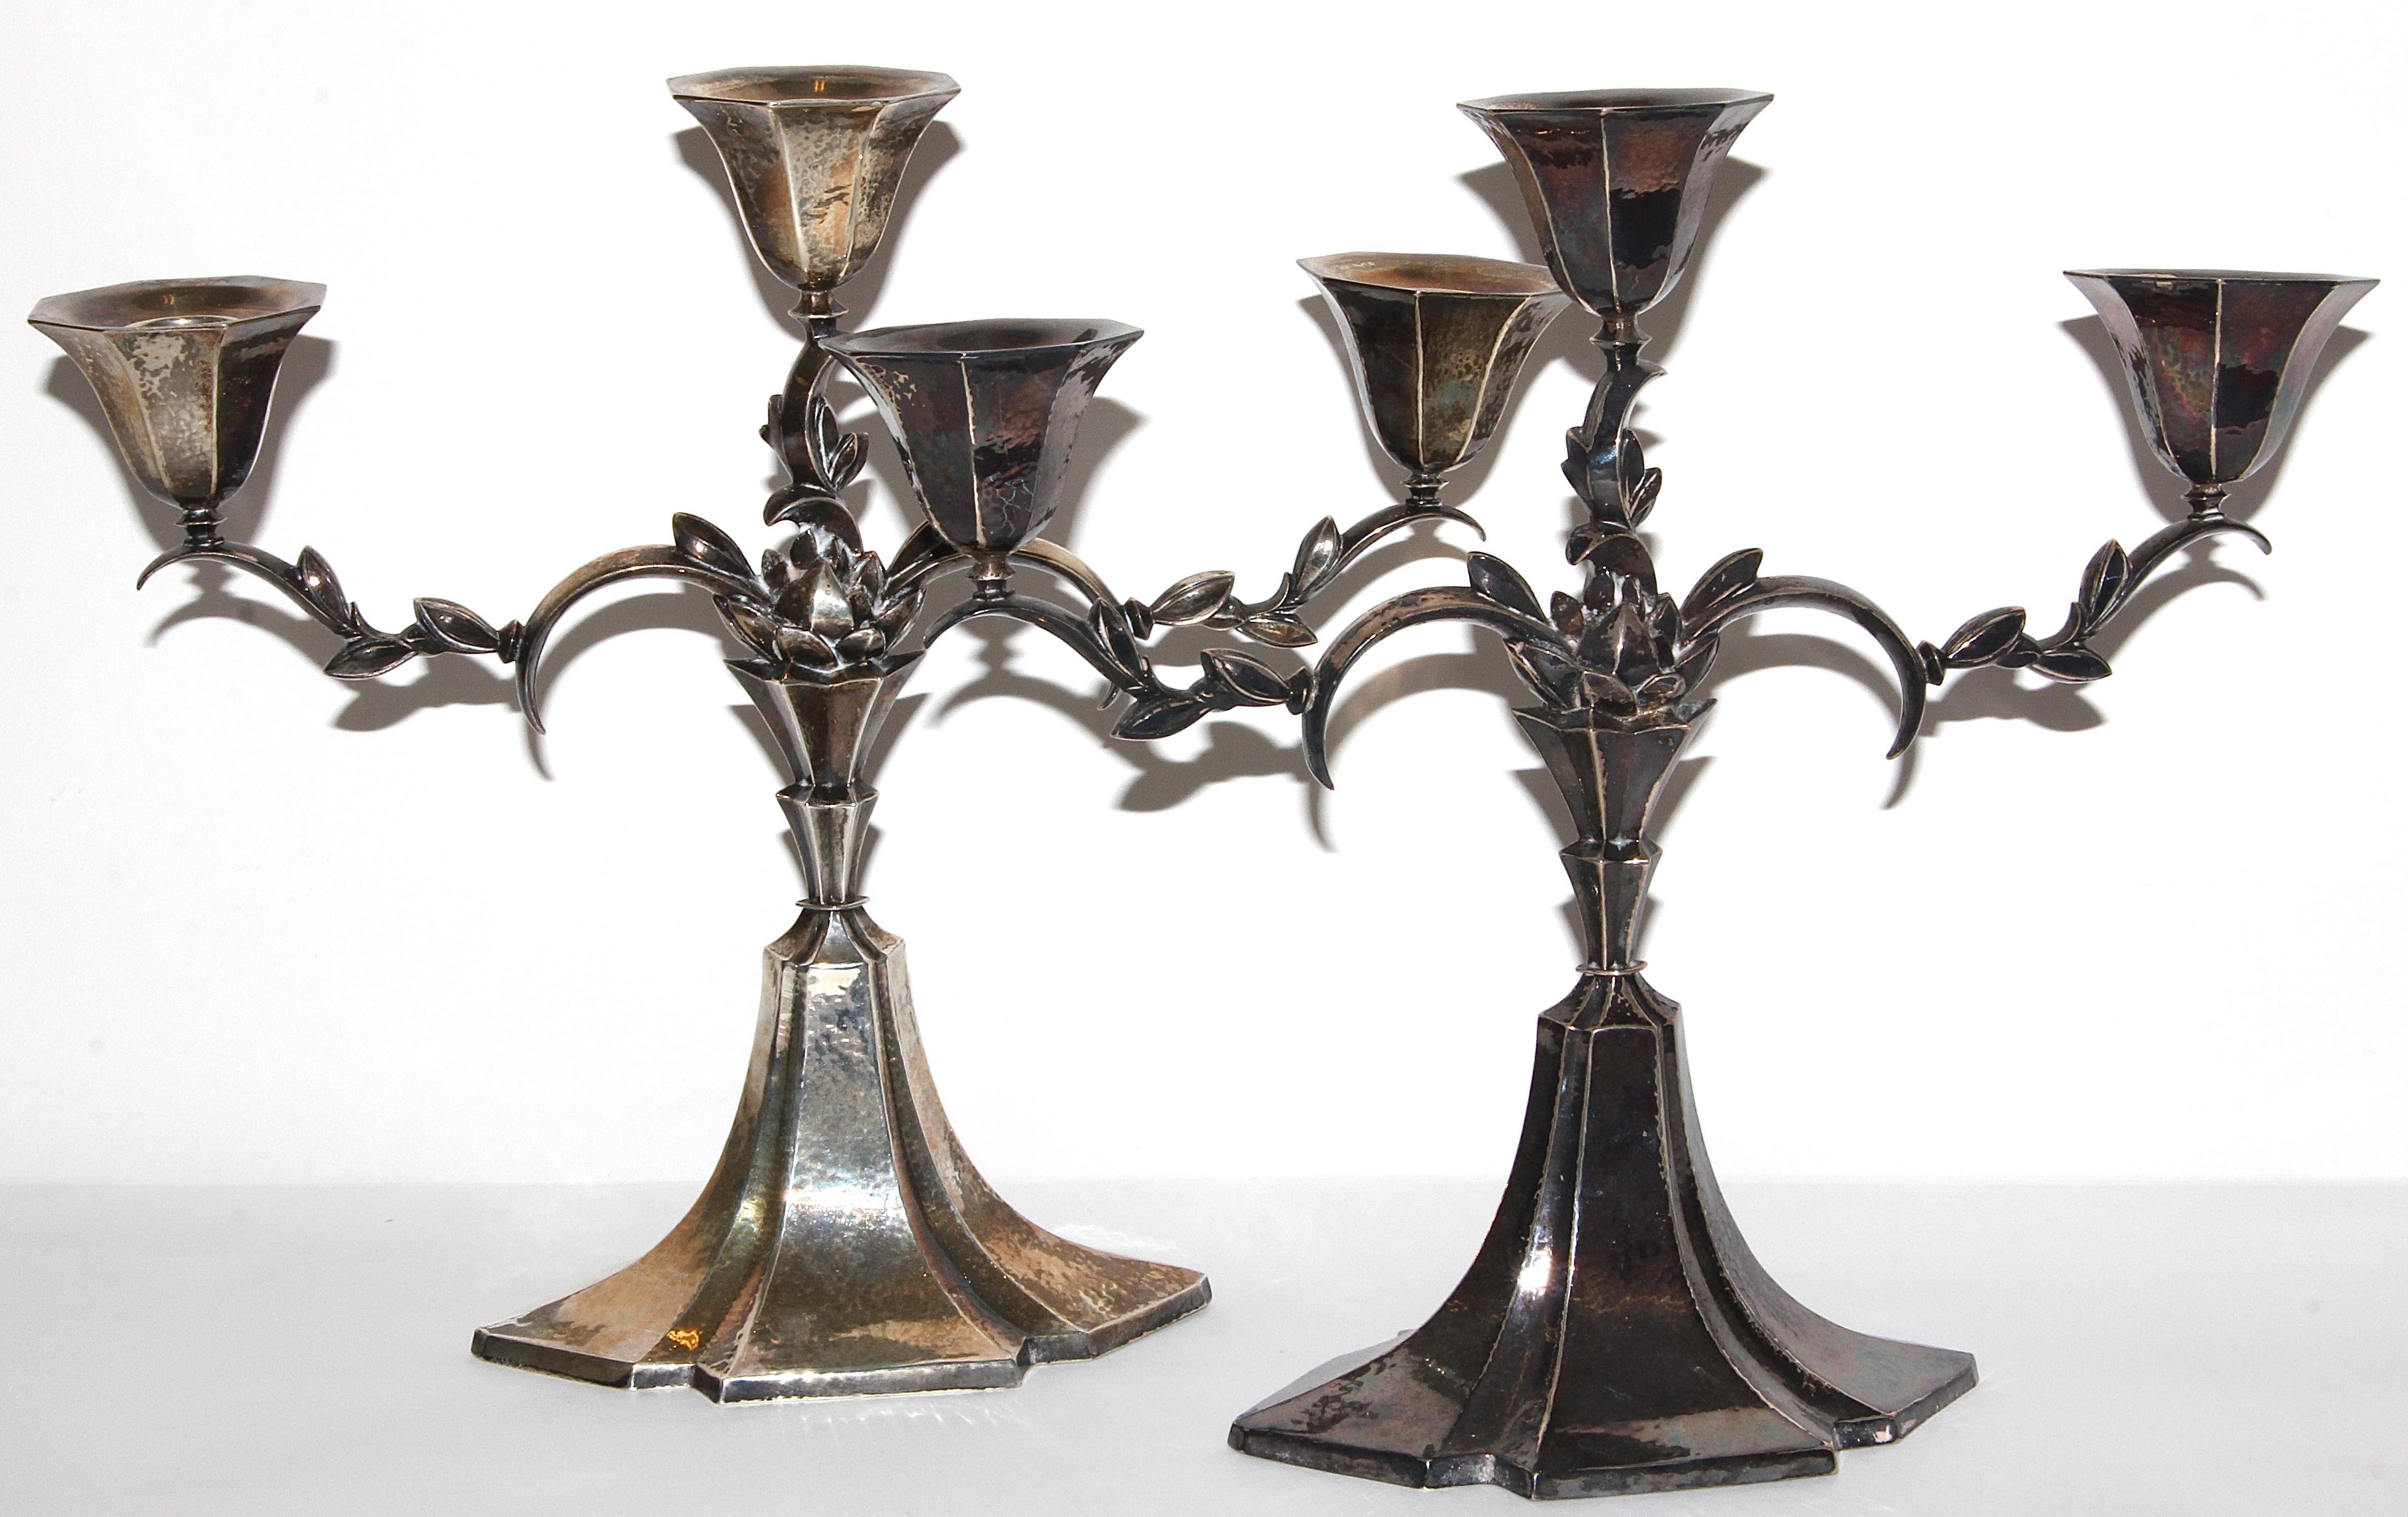 Pair of antique candlesticks, each with three arms, 925 sterling silver.